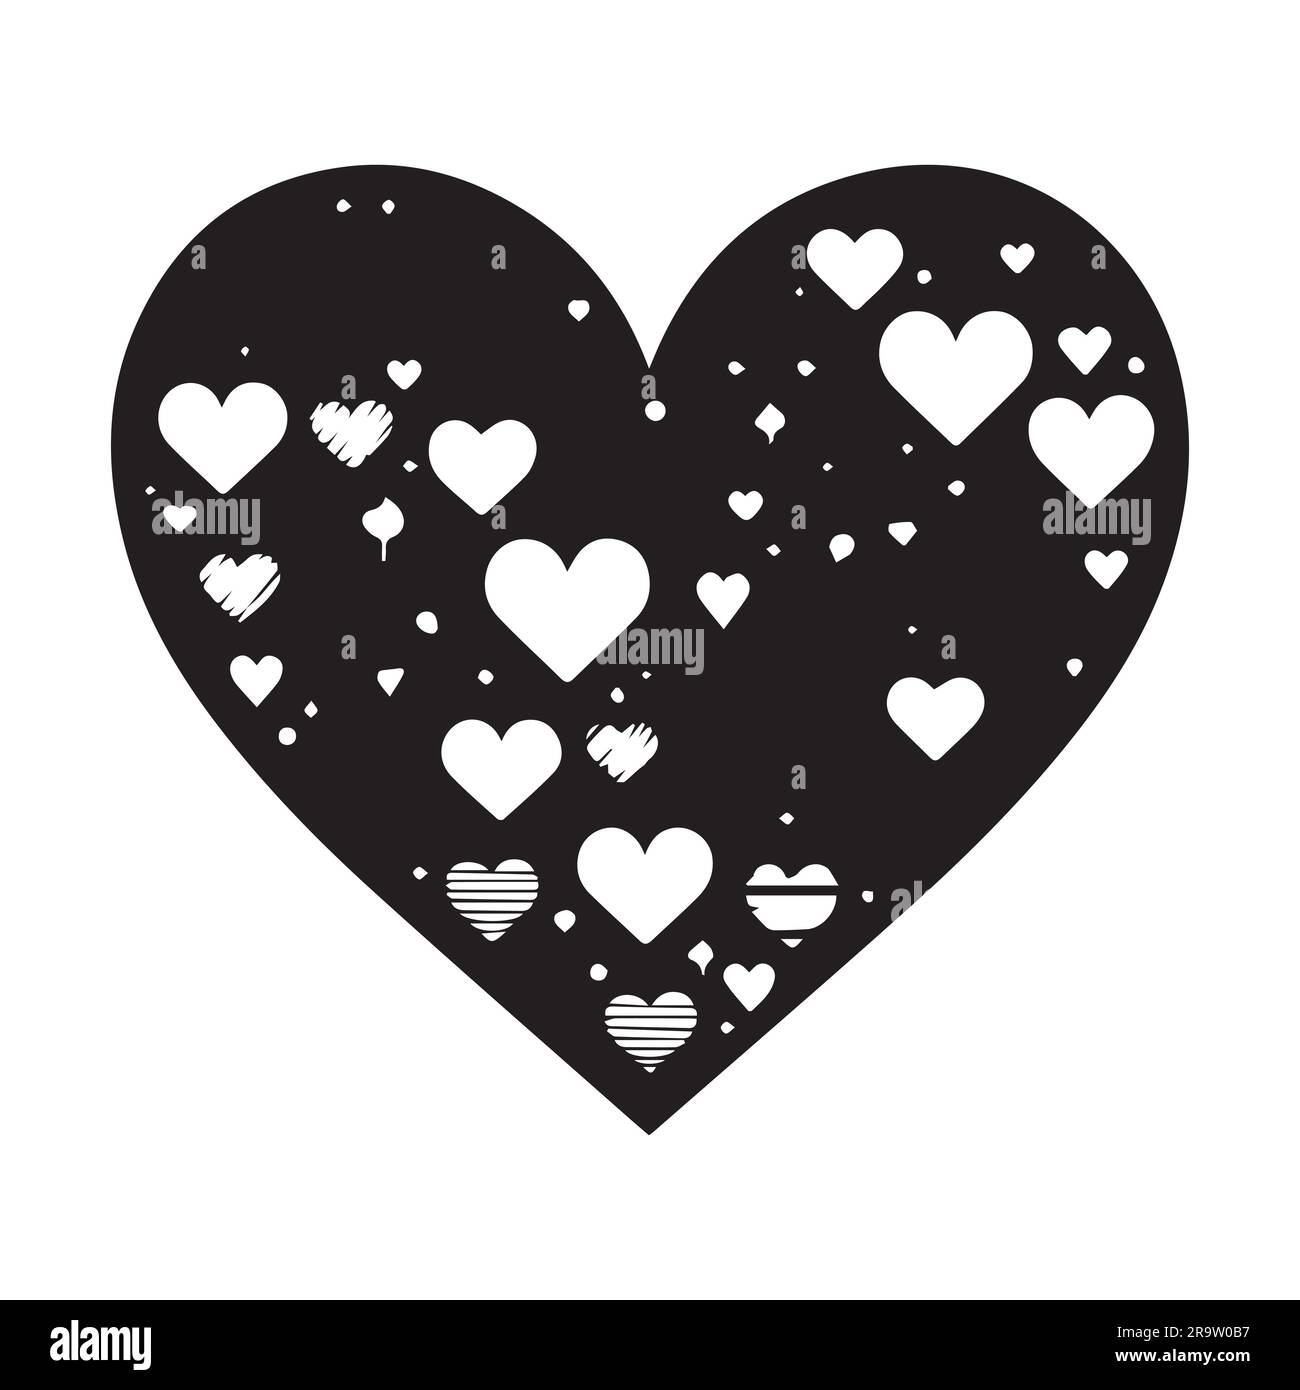 The heart is a symbol of love and Valentine s Day. Flat black icon with a set of cut hearts inside, stencil Stock Vector